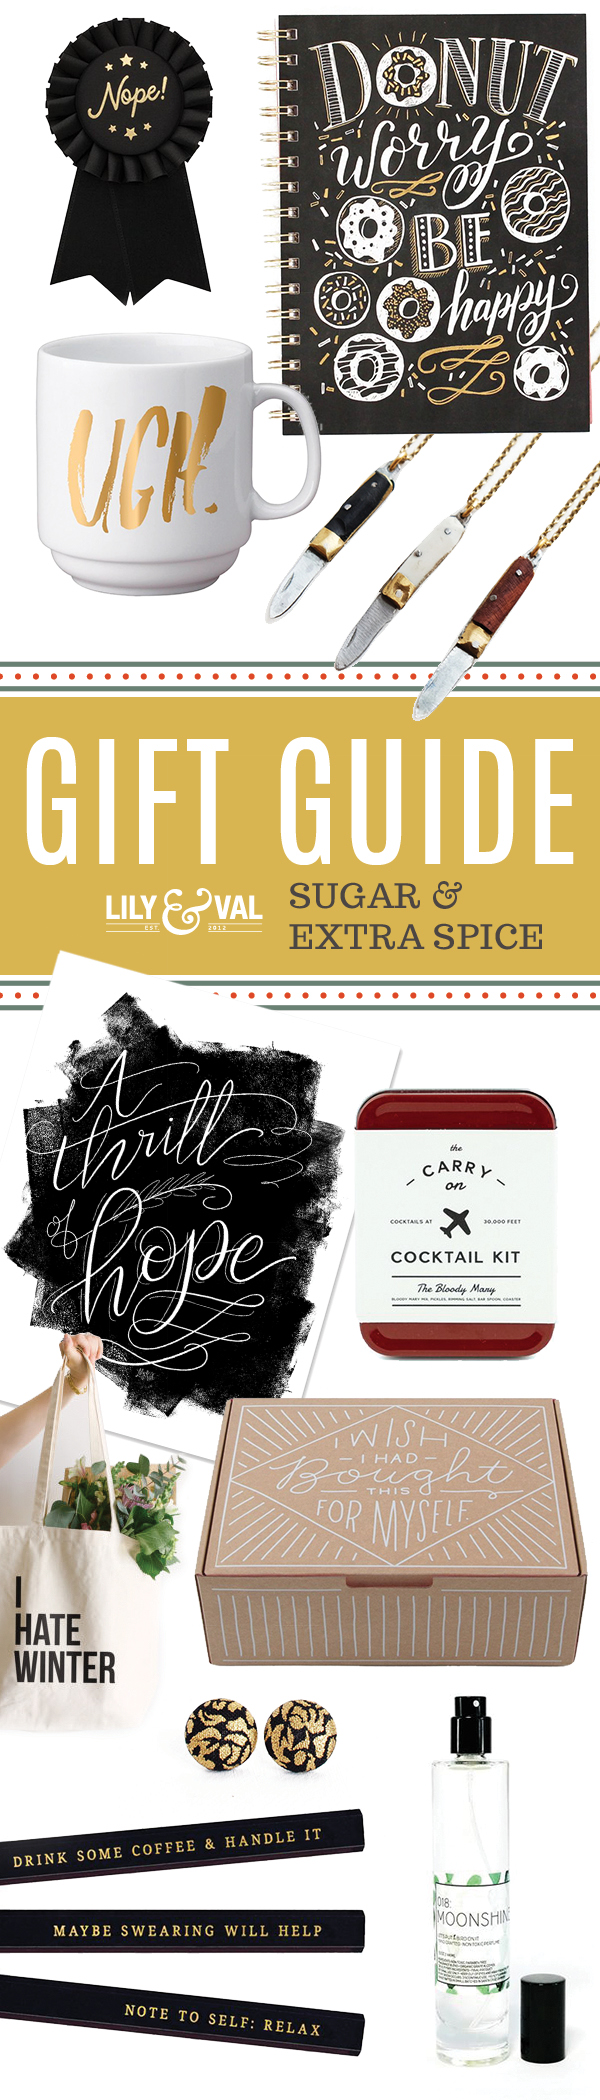 This gift guide is for that special person you know, who has a little sass. When the "girlie" things just doesn't fit the bill this holiday season, try one of these naughty & nice gift ideas.